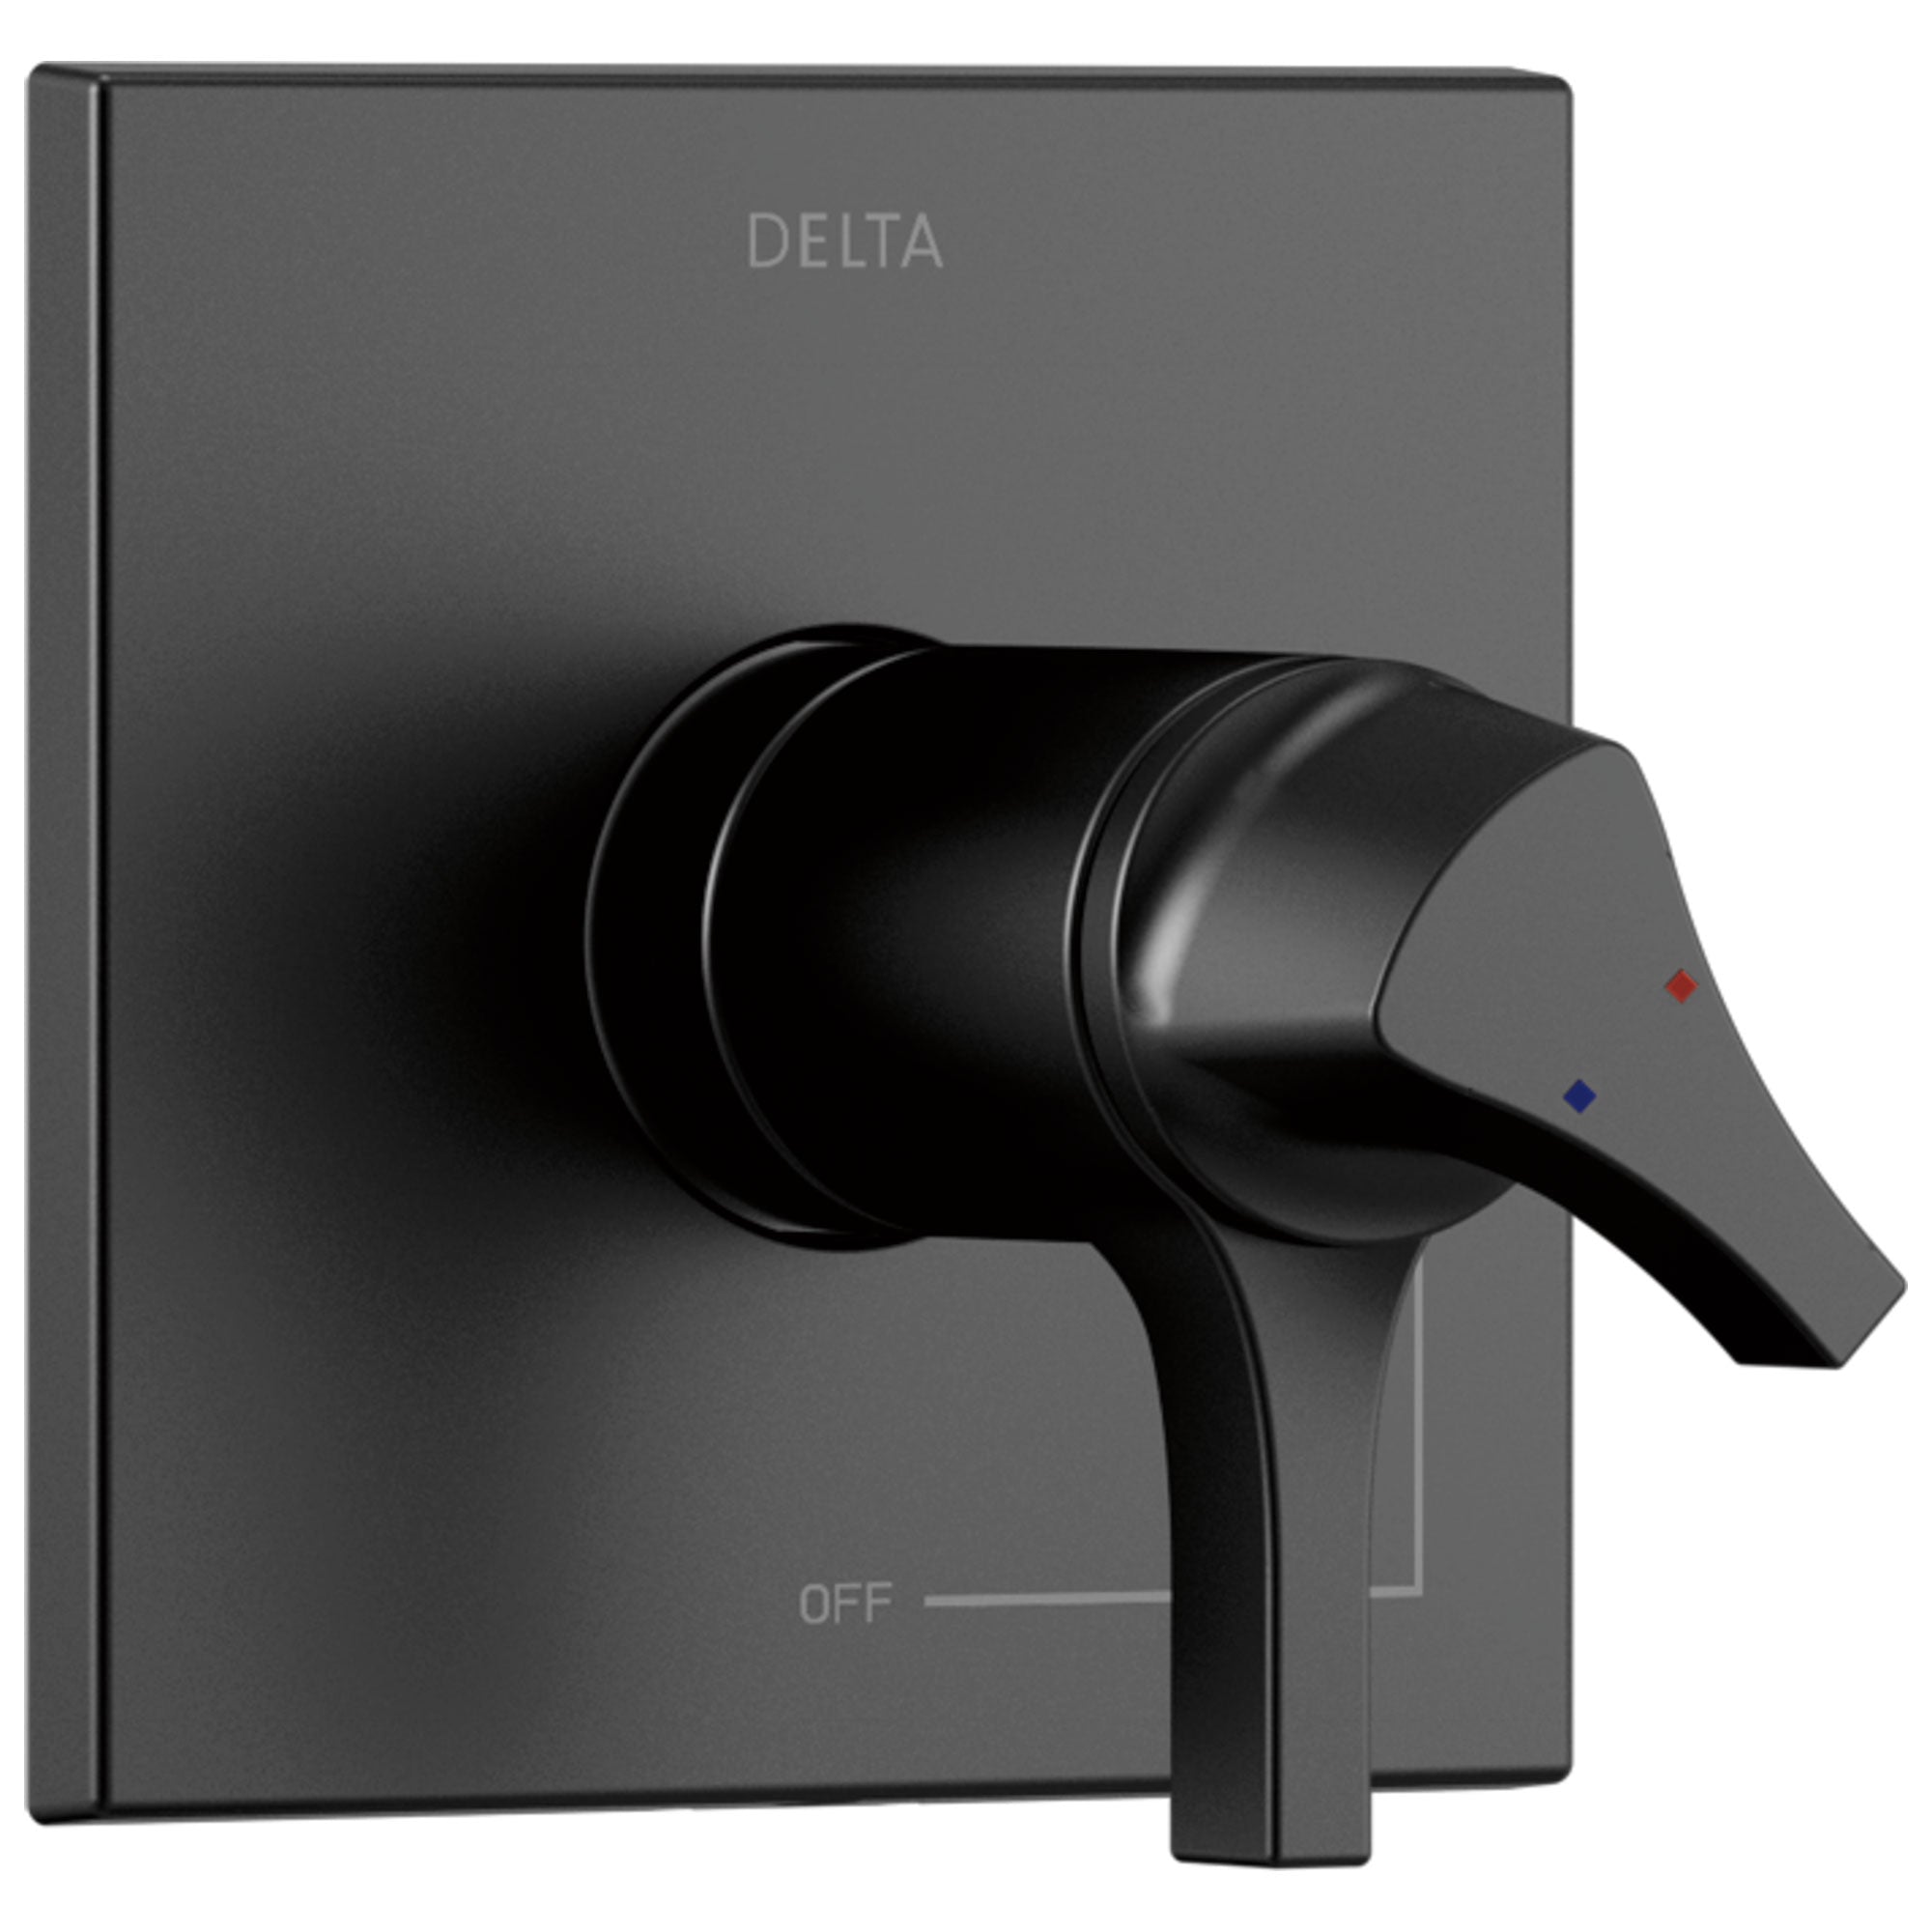 Delta Zura Matte Black Finish Thermostatic Shower Faucet Control Only Includes 17T Cartridge, Handles, and Valve without Stops D3319V